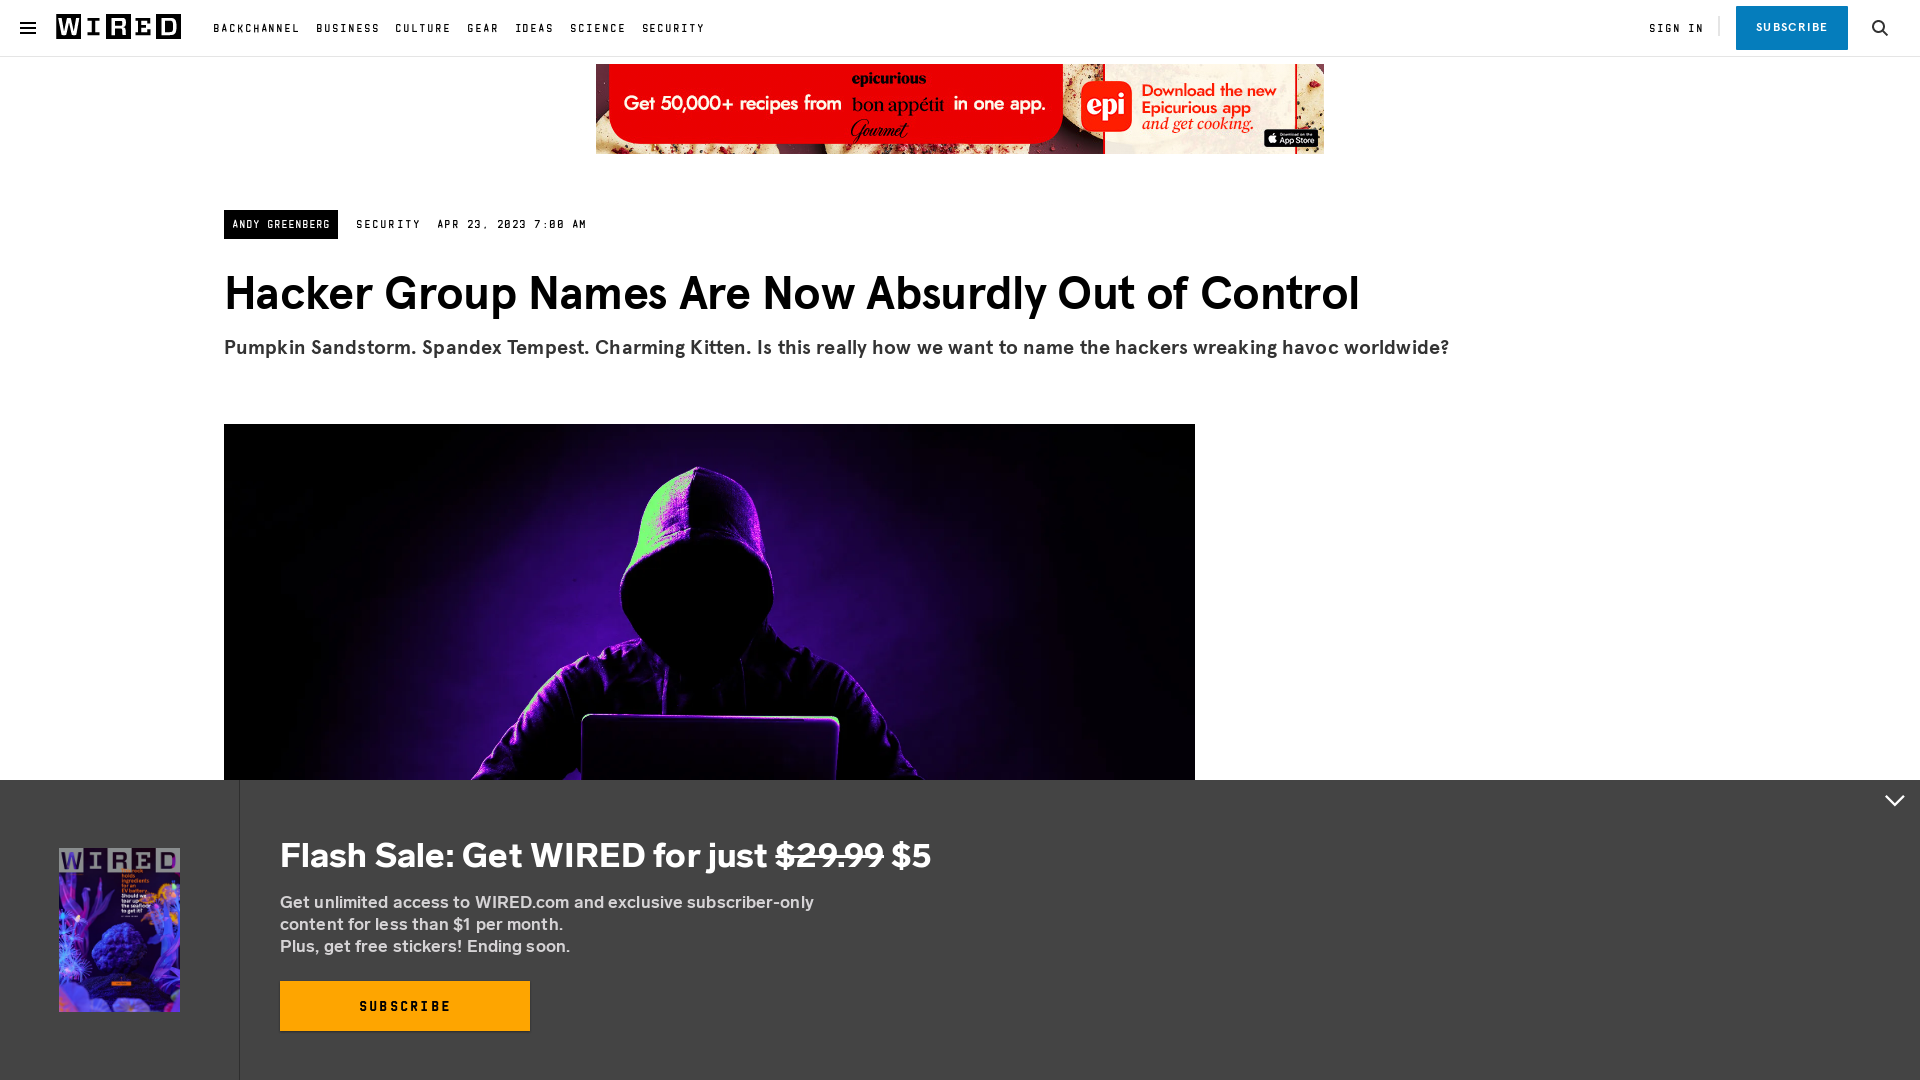 Hacker Group Names Are Now Absurdly Out of Control | WIRED